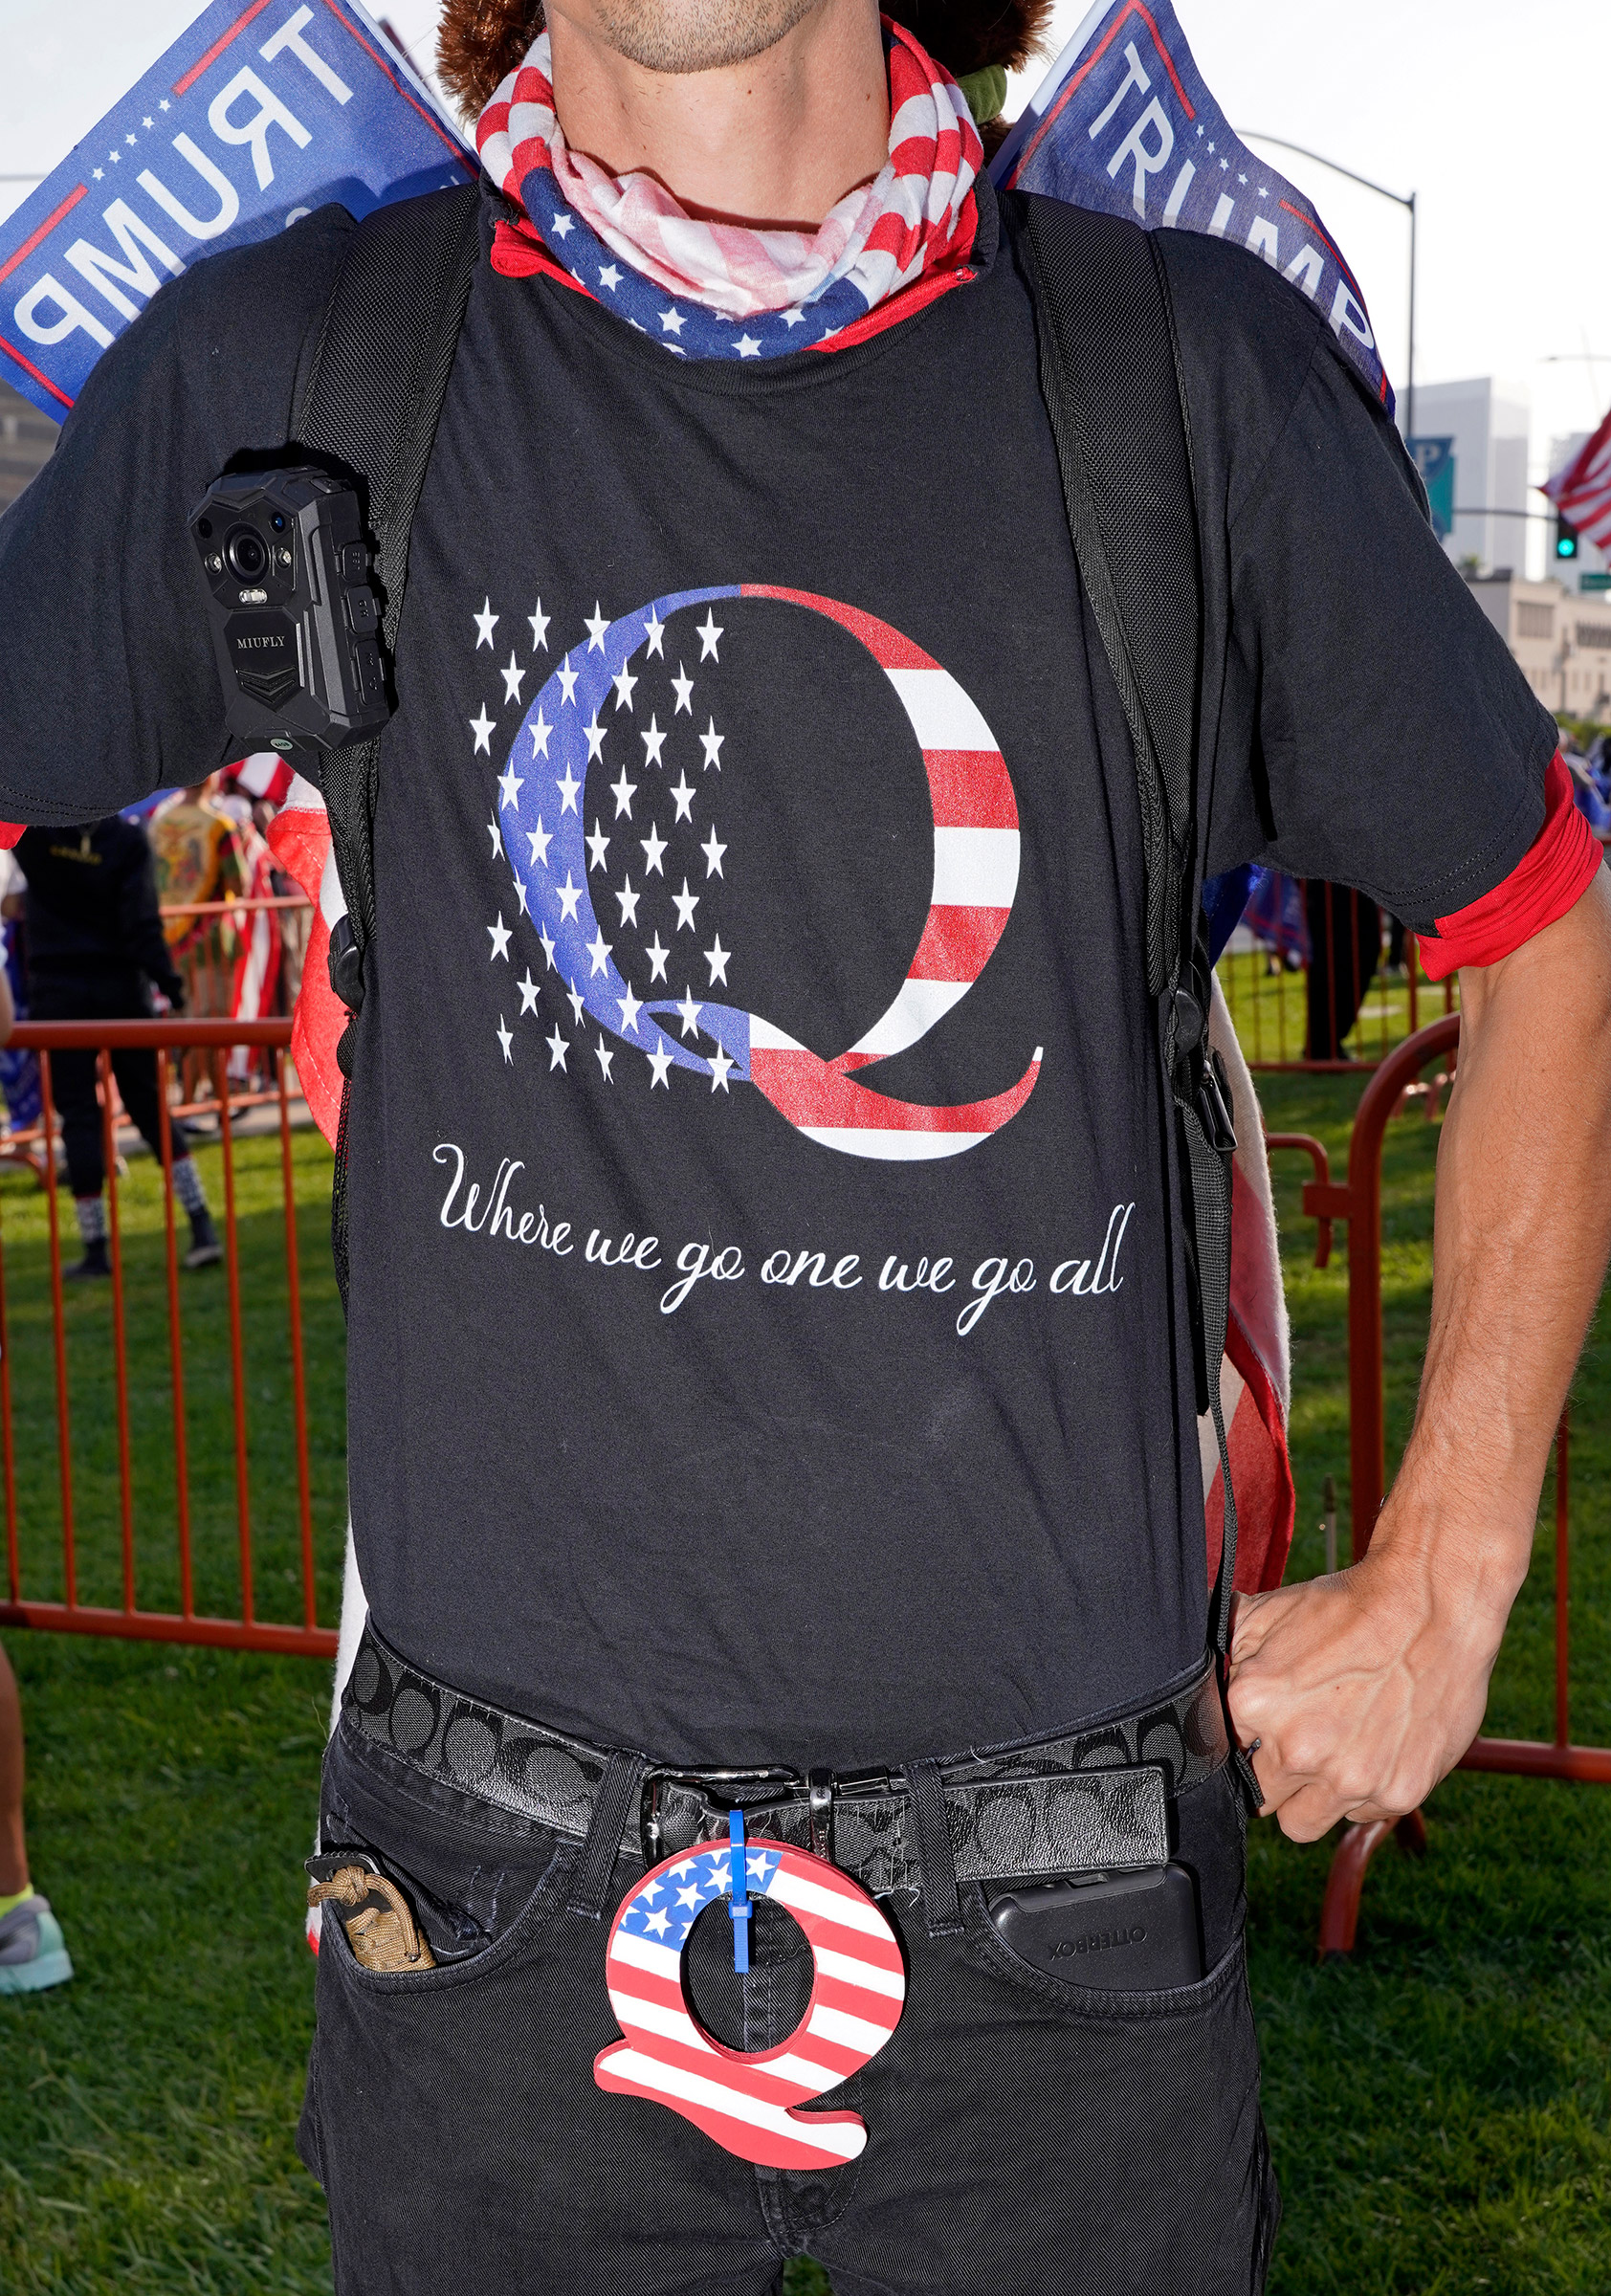 A QAnon shirt at a Trump rally in Beverly Hills, Calif., Oct. 10, 2020.